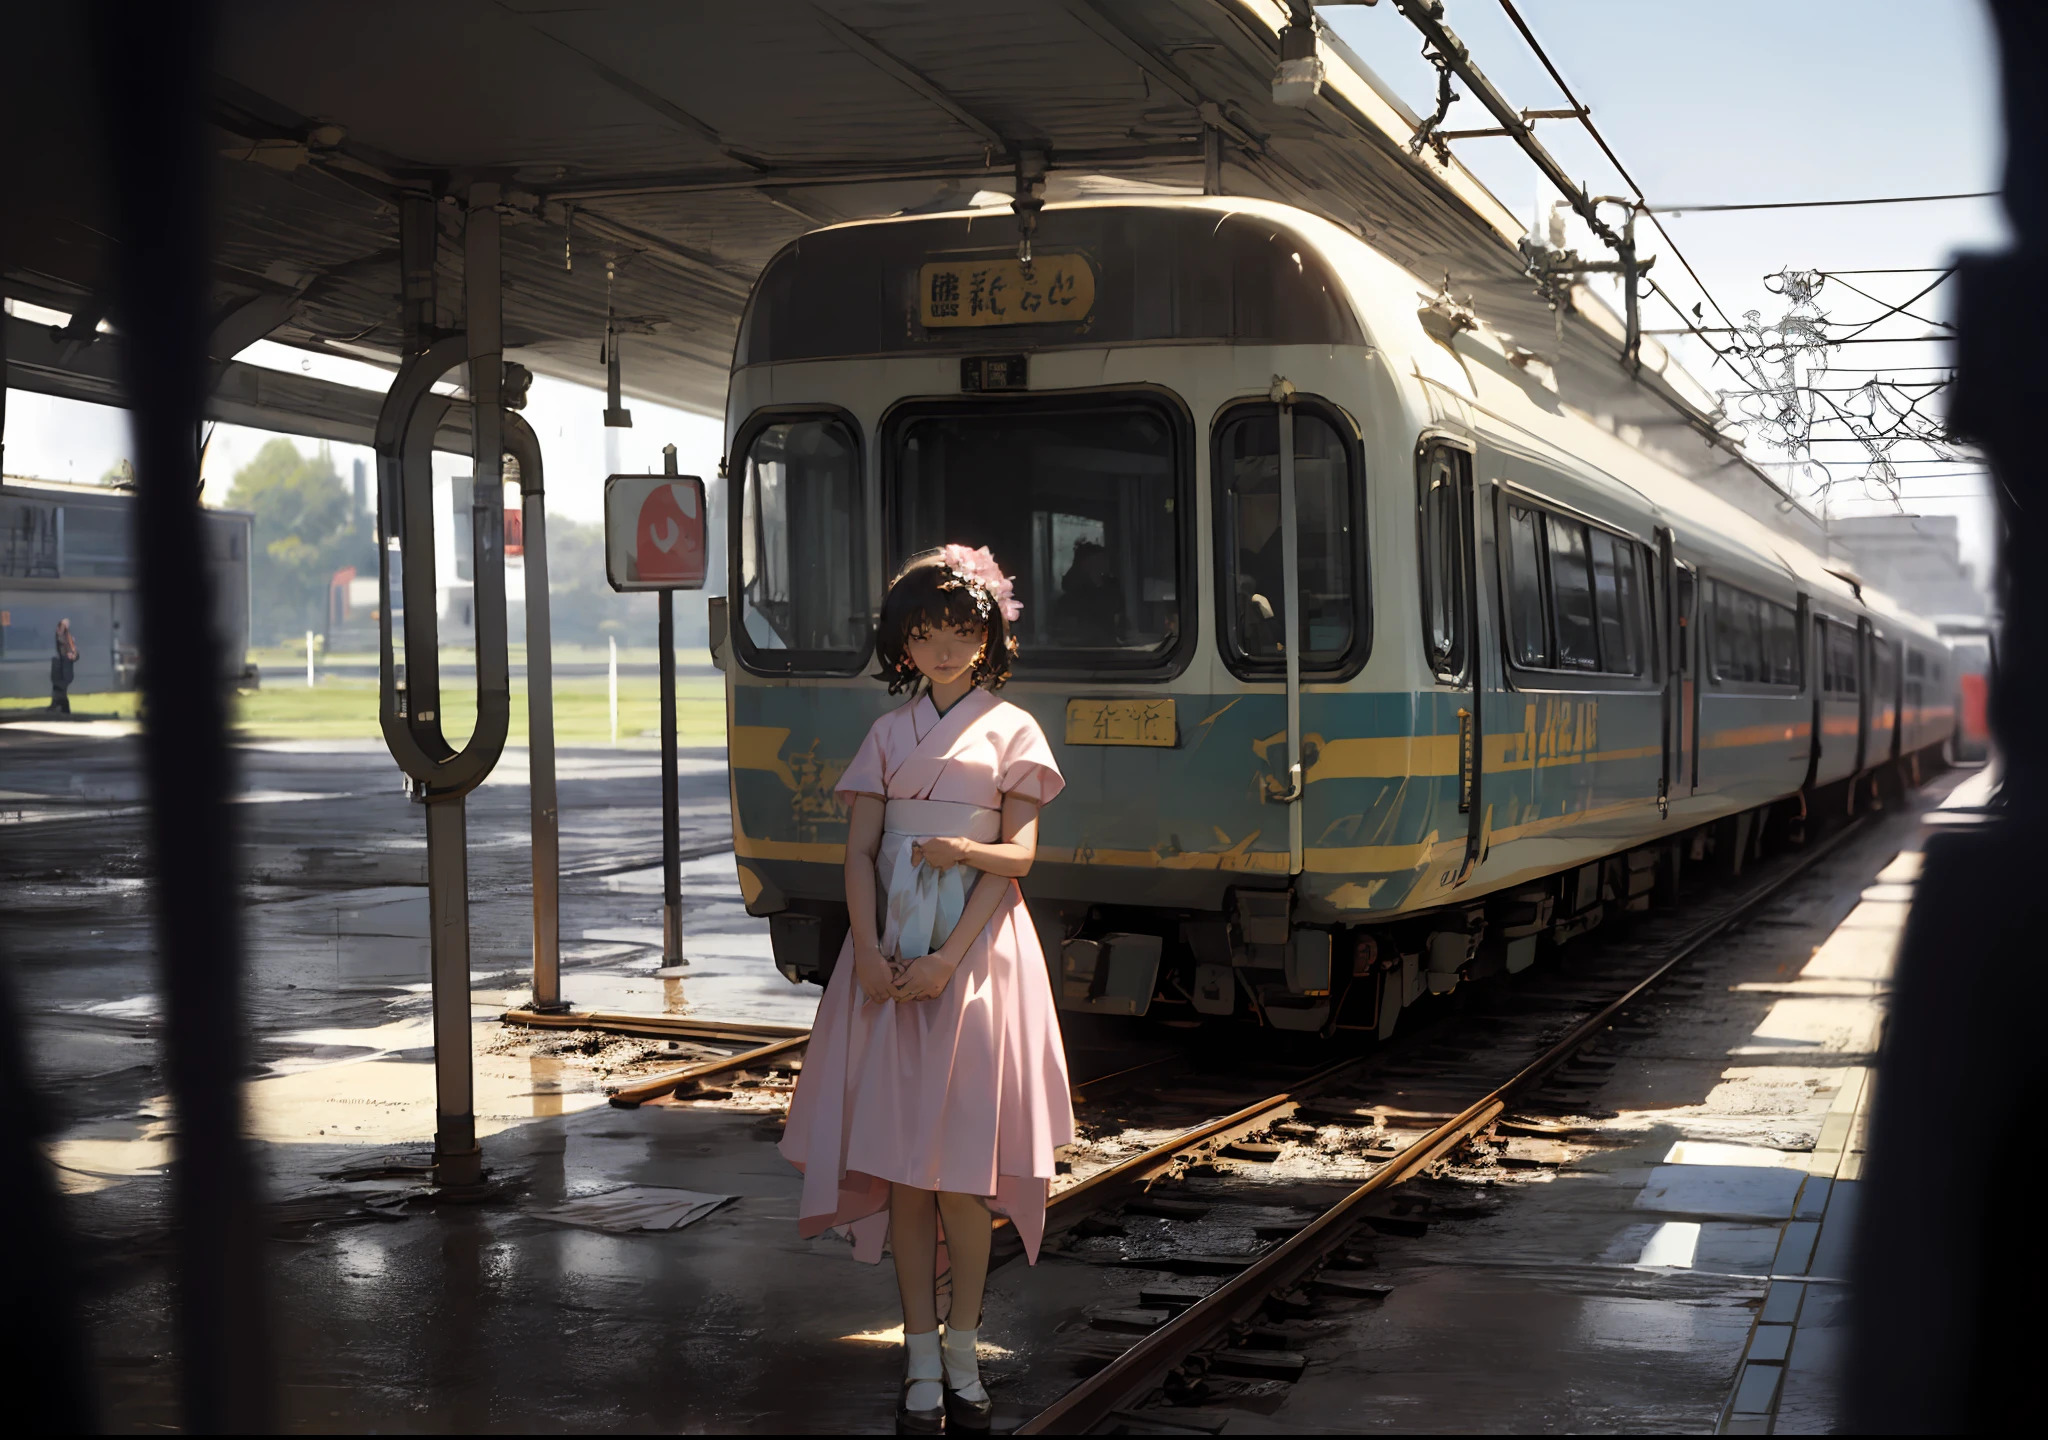 Photos from the 1990s、Fuji Film、championship、​masterpiece、A woman in a pink dress is standing beside a train, Train, alexey egorov, Shot on Ektachrome film,  girl waiting for train, Award-winning color photo, kodakchrome : : 8 K, Cistil 800T 50mm Eastman Color, still from live action movie, japan 1980s